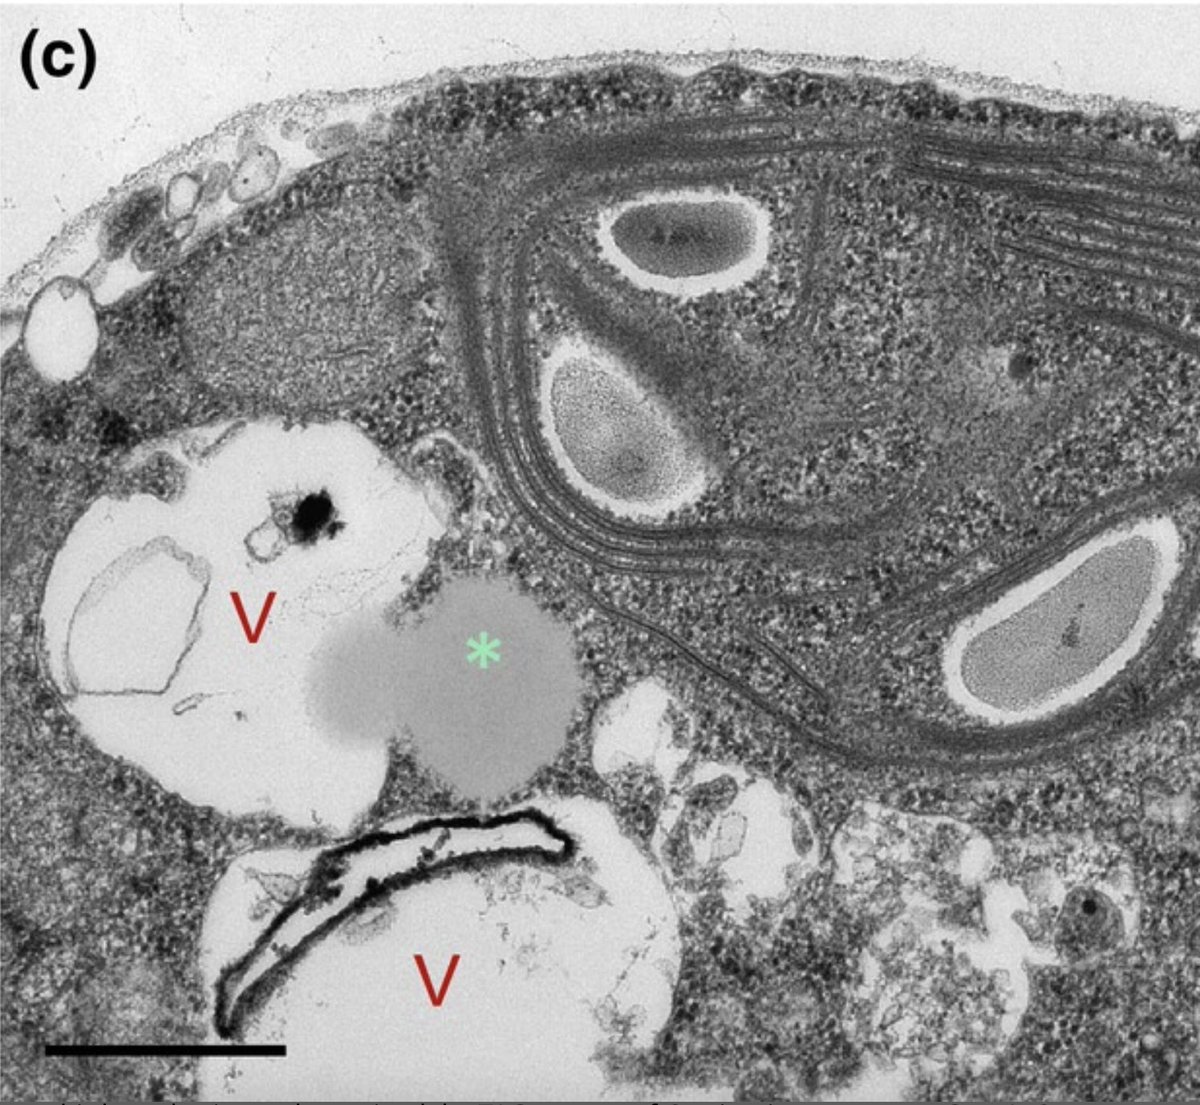 Thrilled to see our new paper published in @NewPhyt ! We describe #lipophagy #autophagy in the new extremophilic microalga Chlamydomonas urium, isolated from the source of the Tinto river (Nerva, Spain). doi.org/10.1111/nph.19…